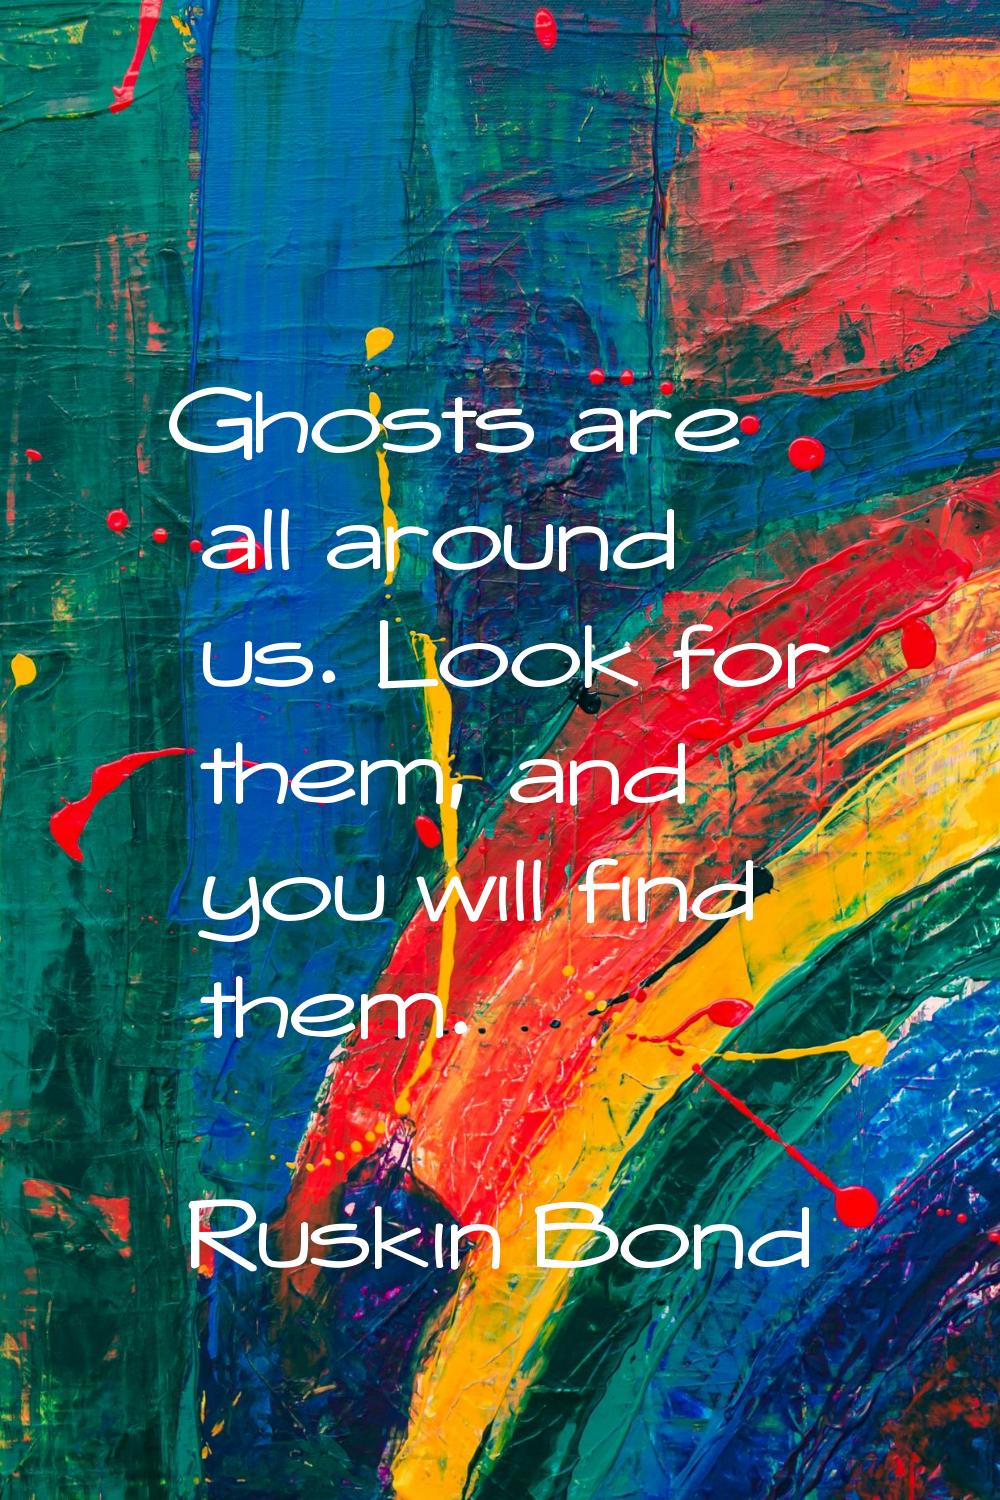 Ghosts are all around us. Look for them, and you will find them.